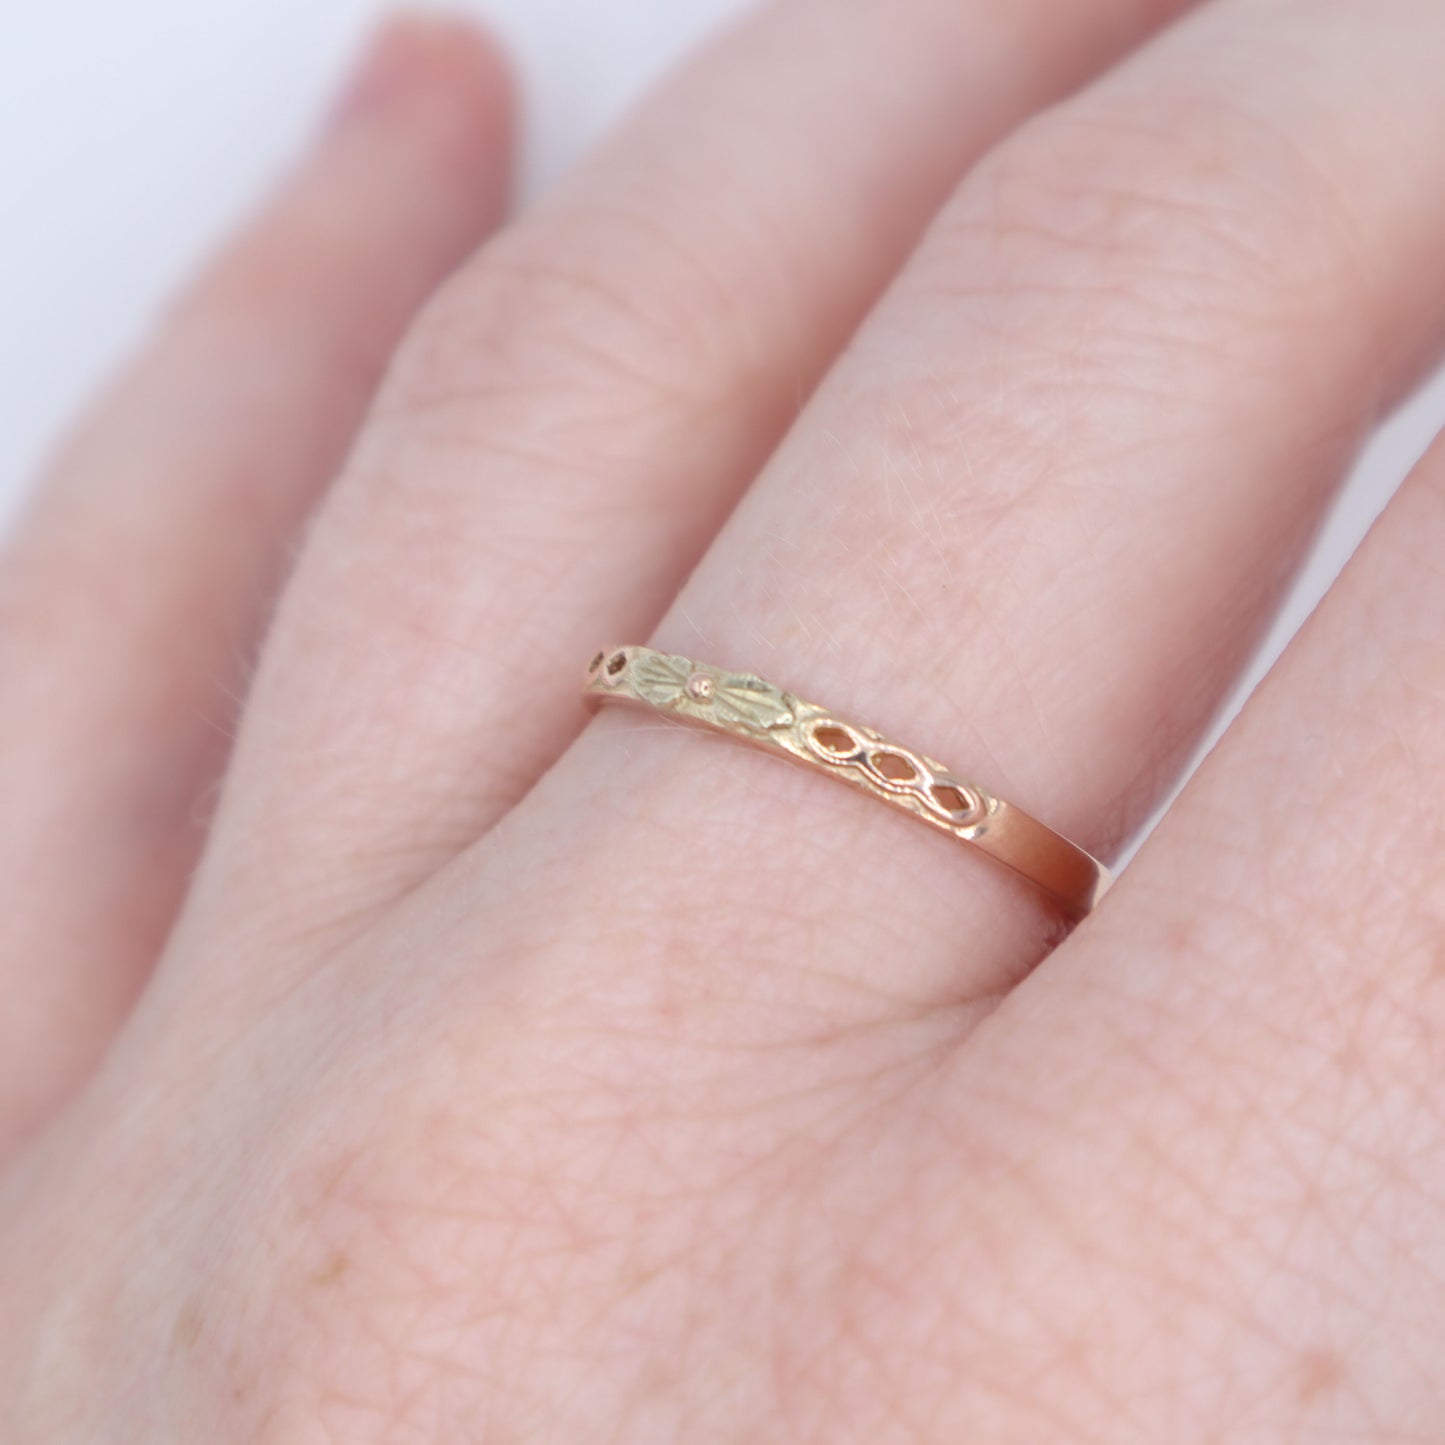 Two-Toned Filigree Band